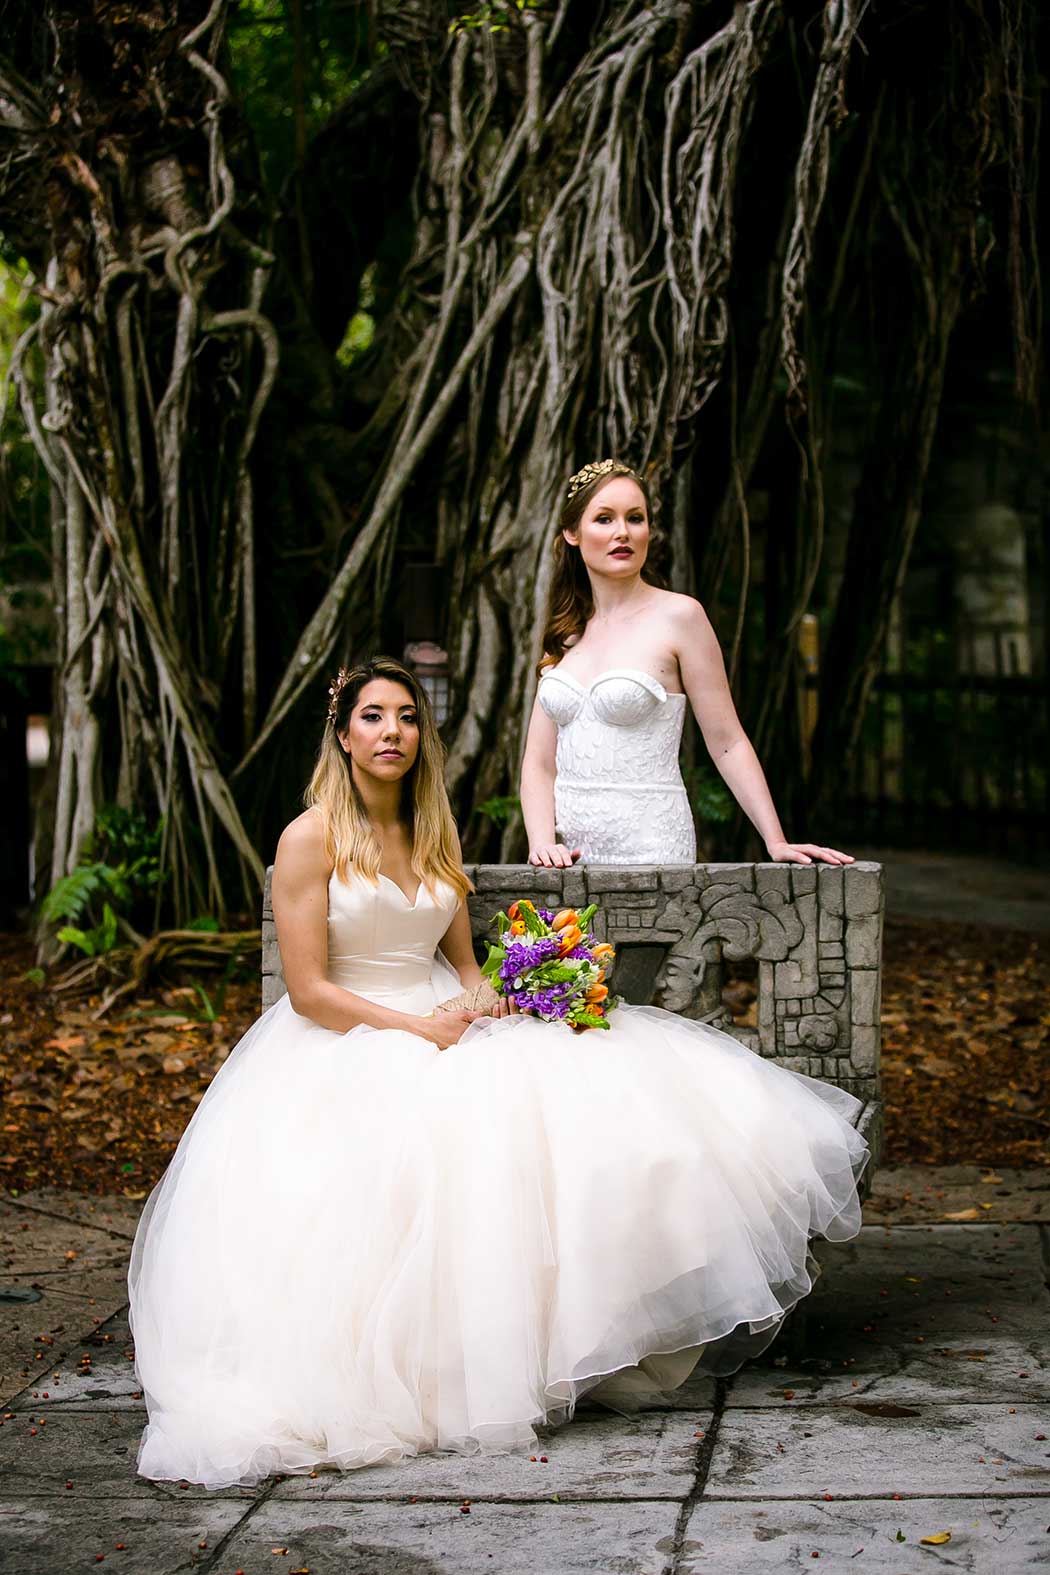 photographing two brides during a modern wedding in palm beach